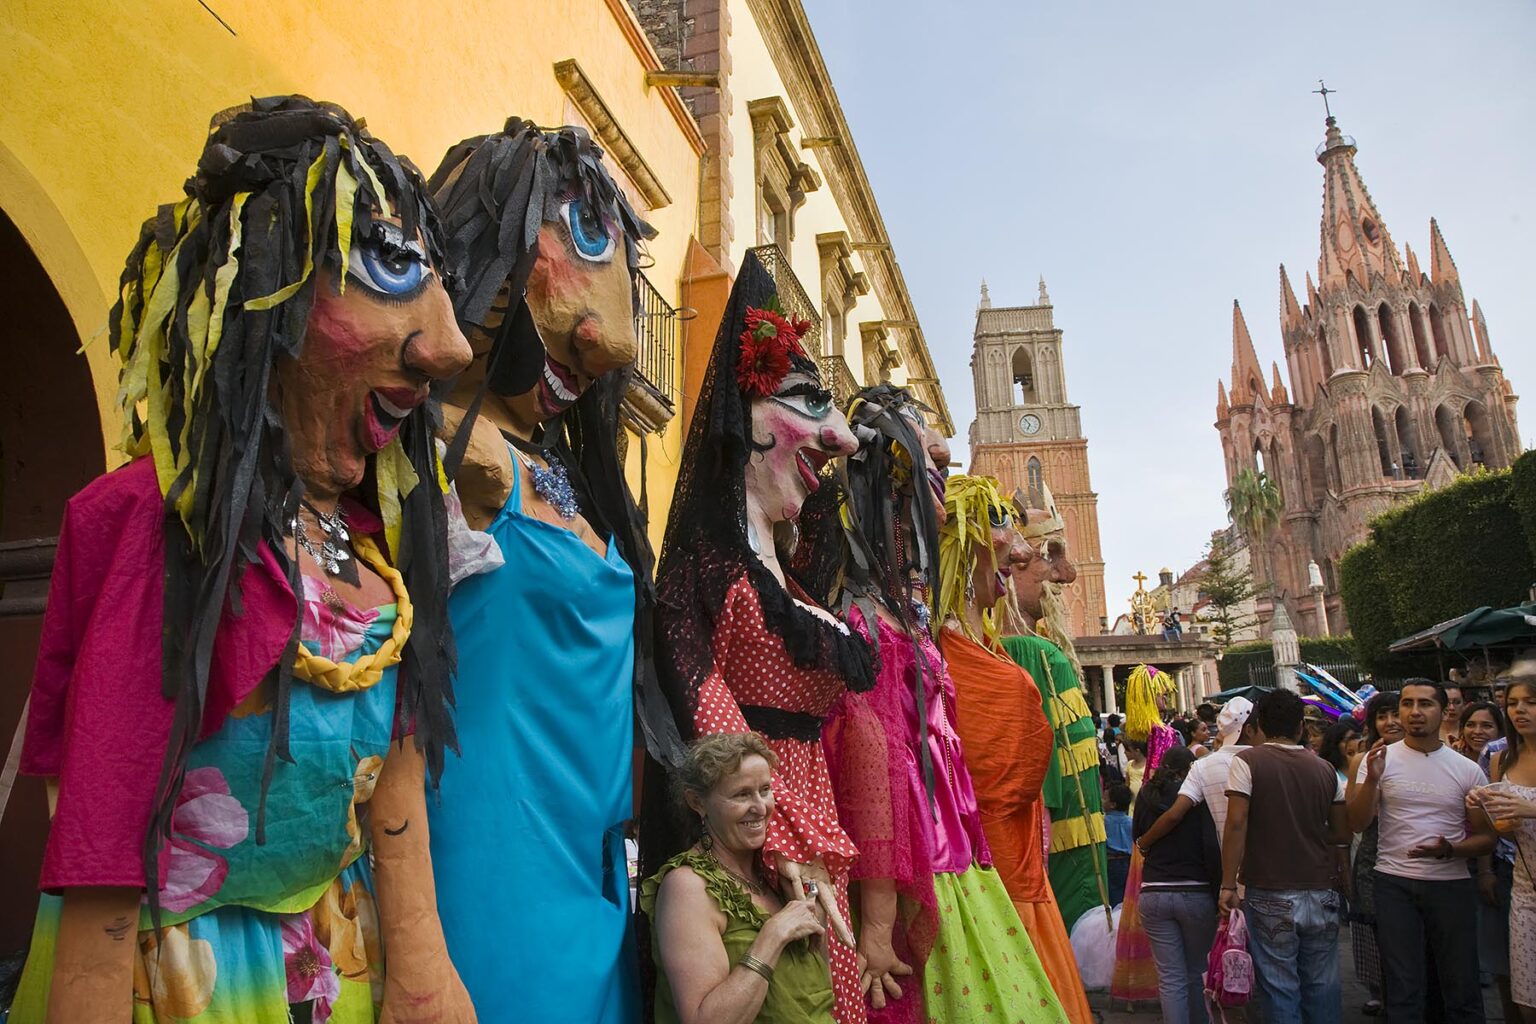 PAPER MACHE GIANTS and the CATHEDRAL are part of the annual INDEPENDENCE DAY PARADE in September - SAN MIGUEL DE ALLENDE, MEXICO